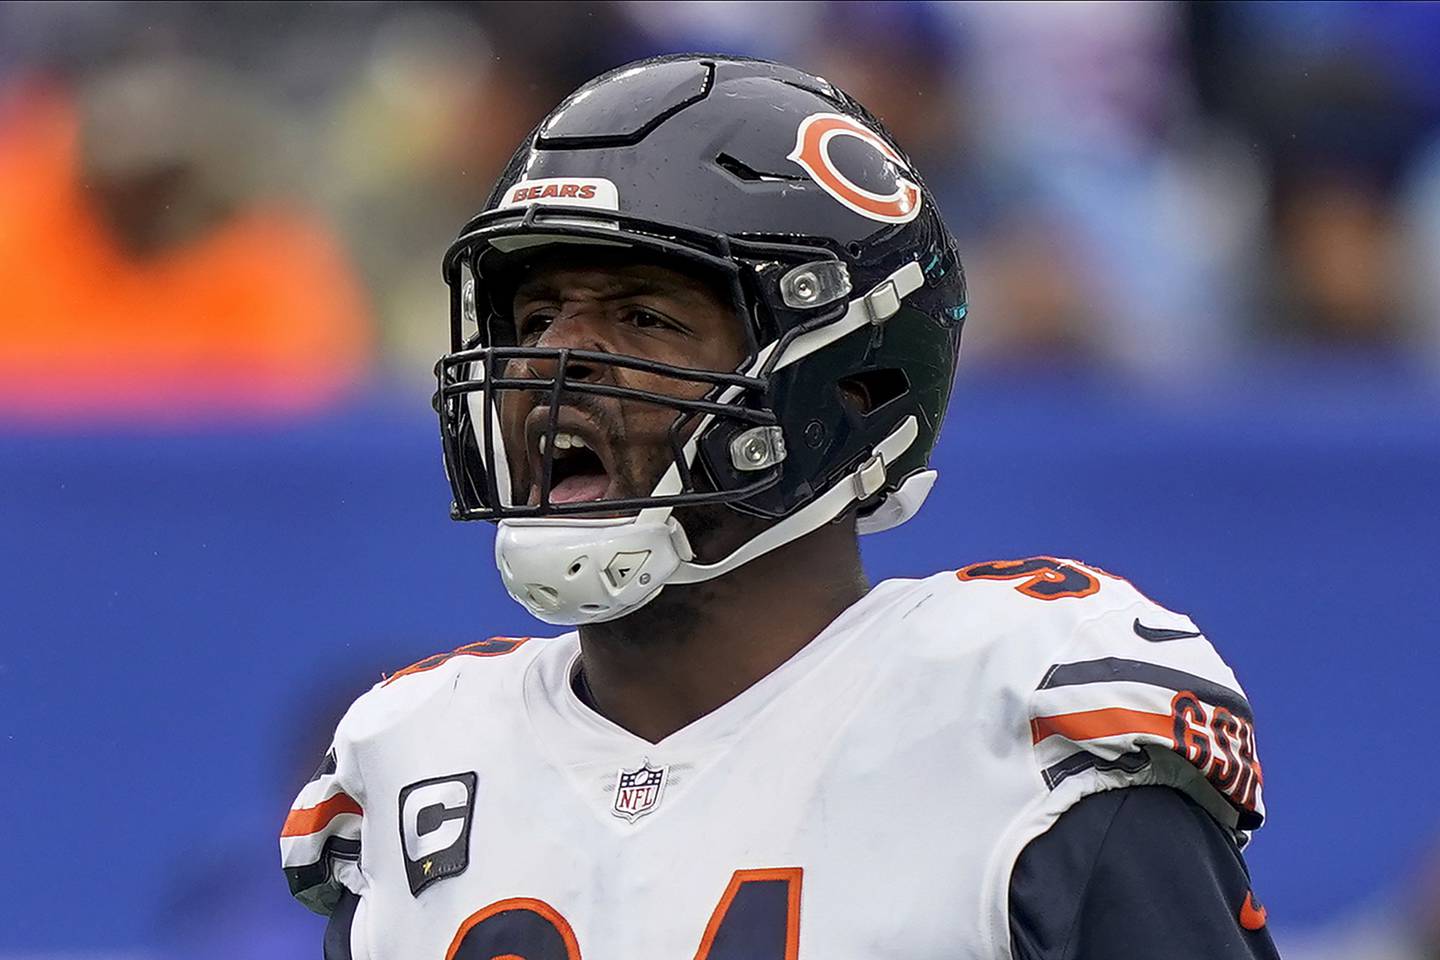 FILE - Chicago Bears linebacker Robert Quinn reacts during the fourth quarter of against the New York Giants, on Sunday, Oct. 2, 2022, in East Rutherford, N.J. The undefeated Philadelphia Eagles acquired three-time Pro Bowl defensive end Robert Quinn from the Bears on Wednesday, Oct. 26, 2022, a person familiar with the situation said. The person spoke on the condition of anonymity because the teams haven’t officially announced the move. Chicago gets a fourth-round pick in return. The NFL Network and ESPN first reported the trade.